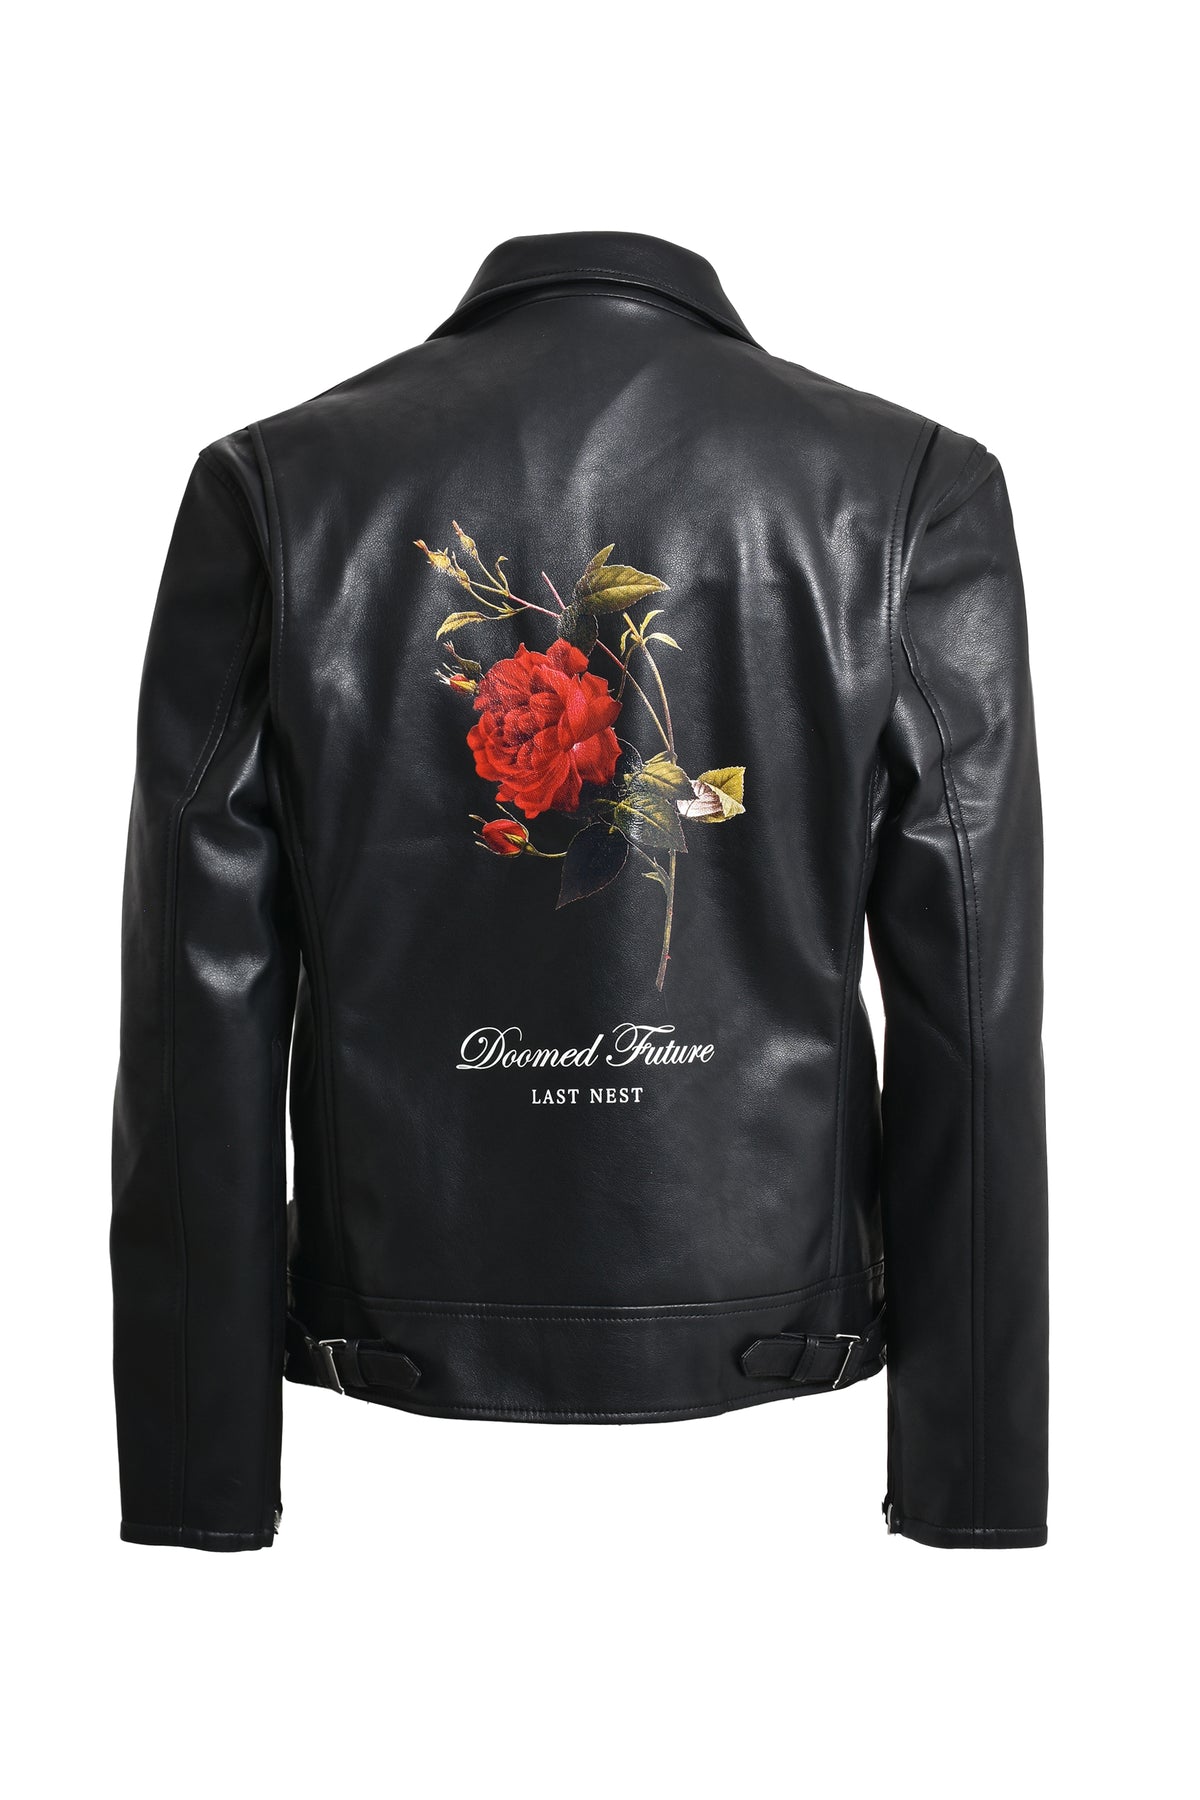 LEATHER ROSE RIDERS JACKET / BLK